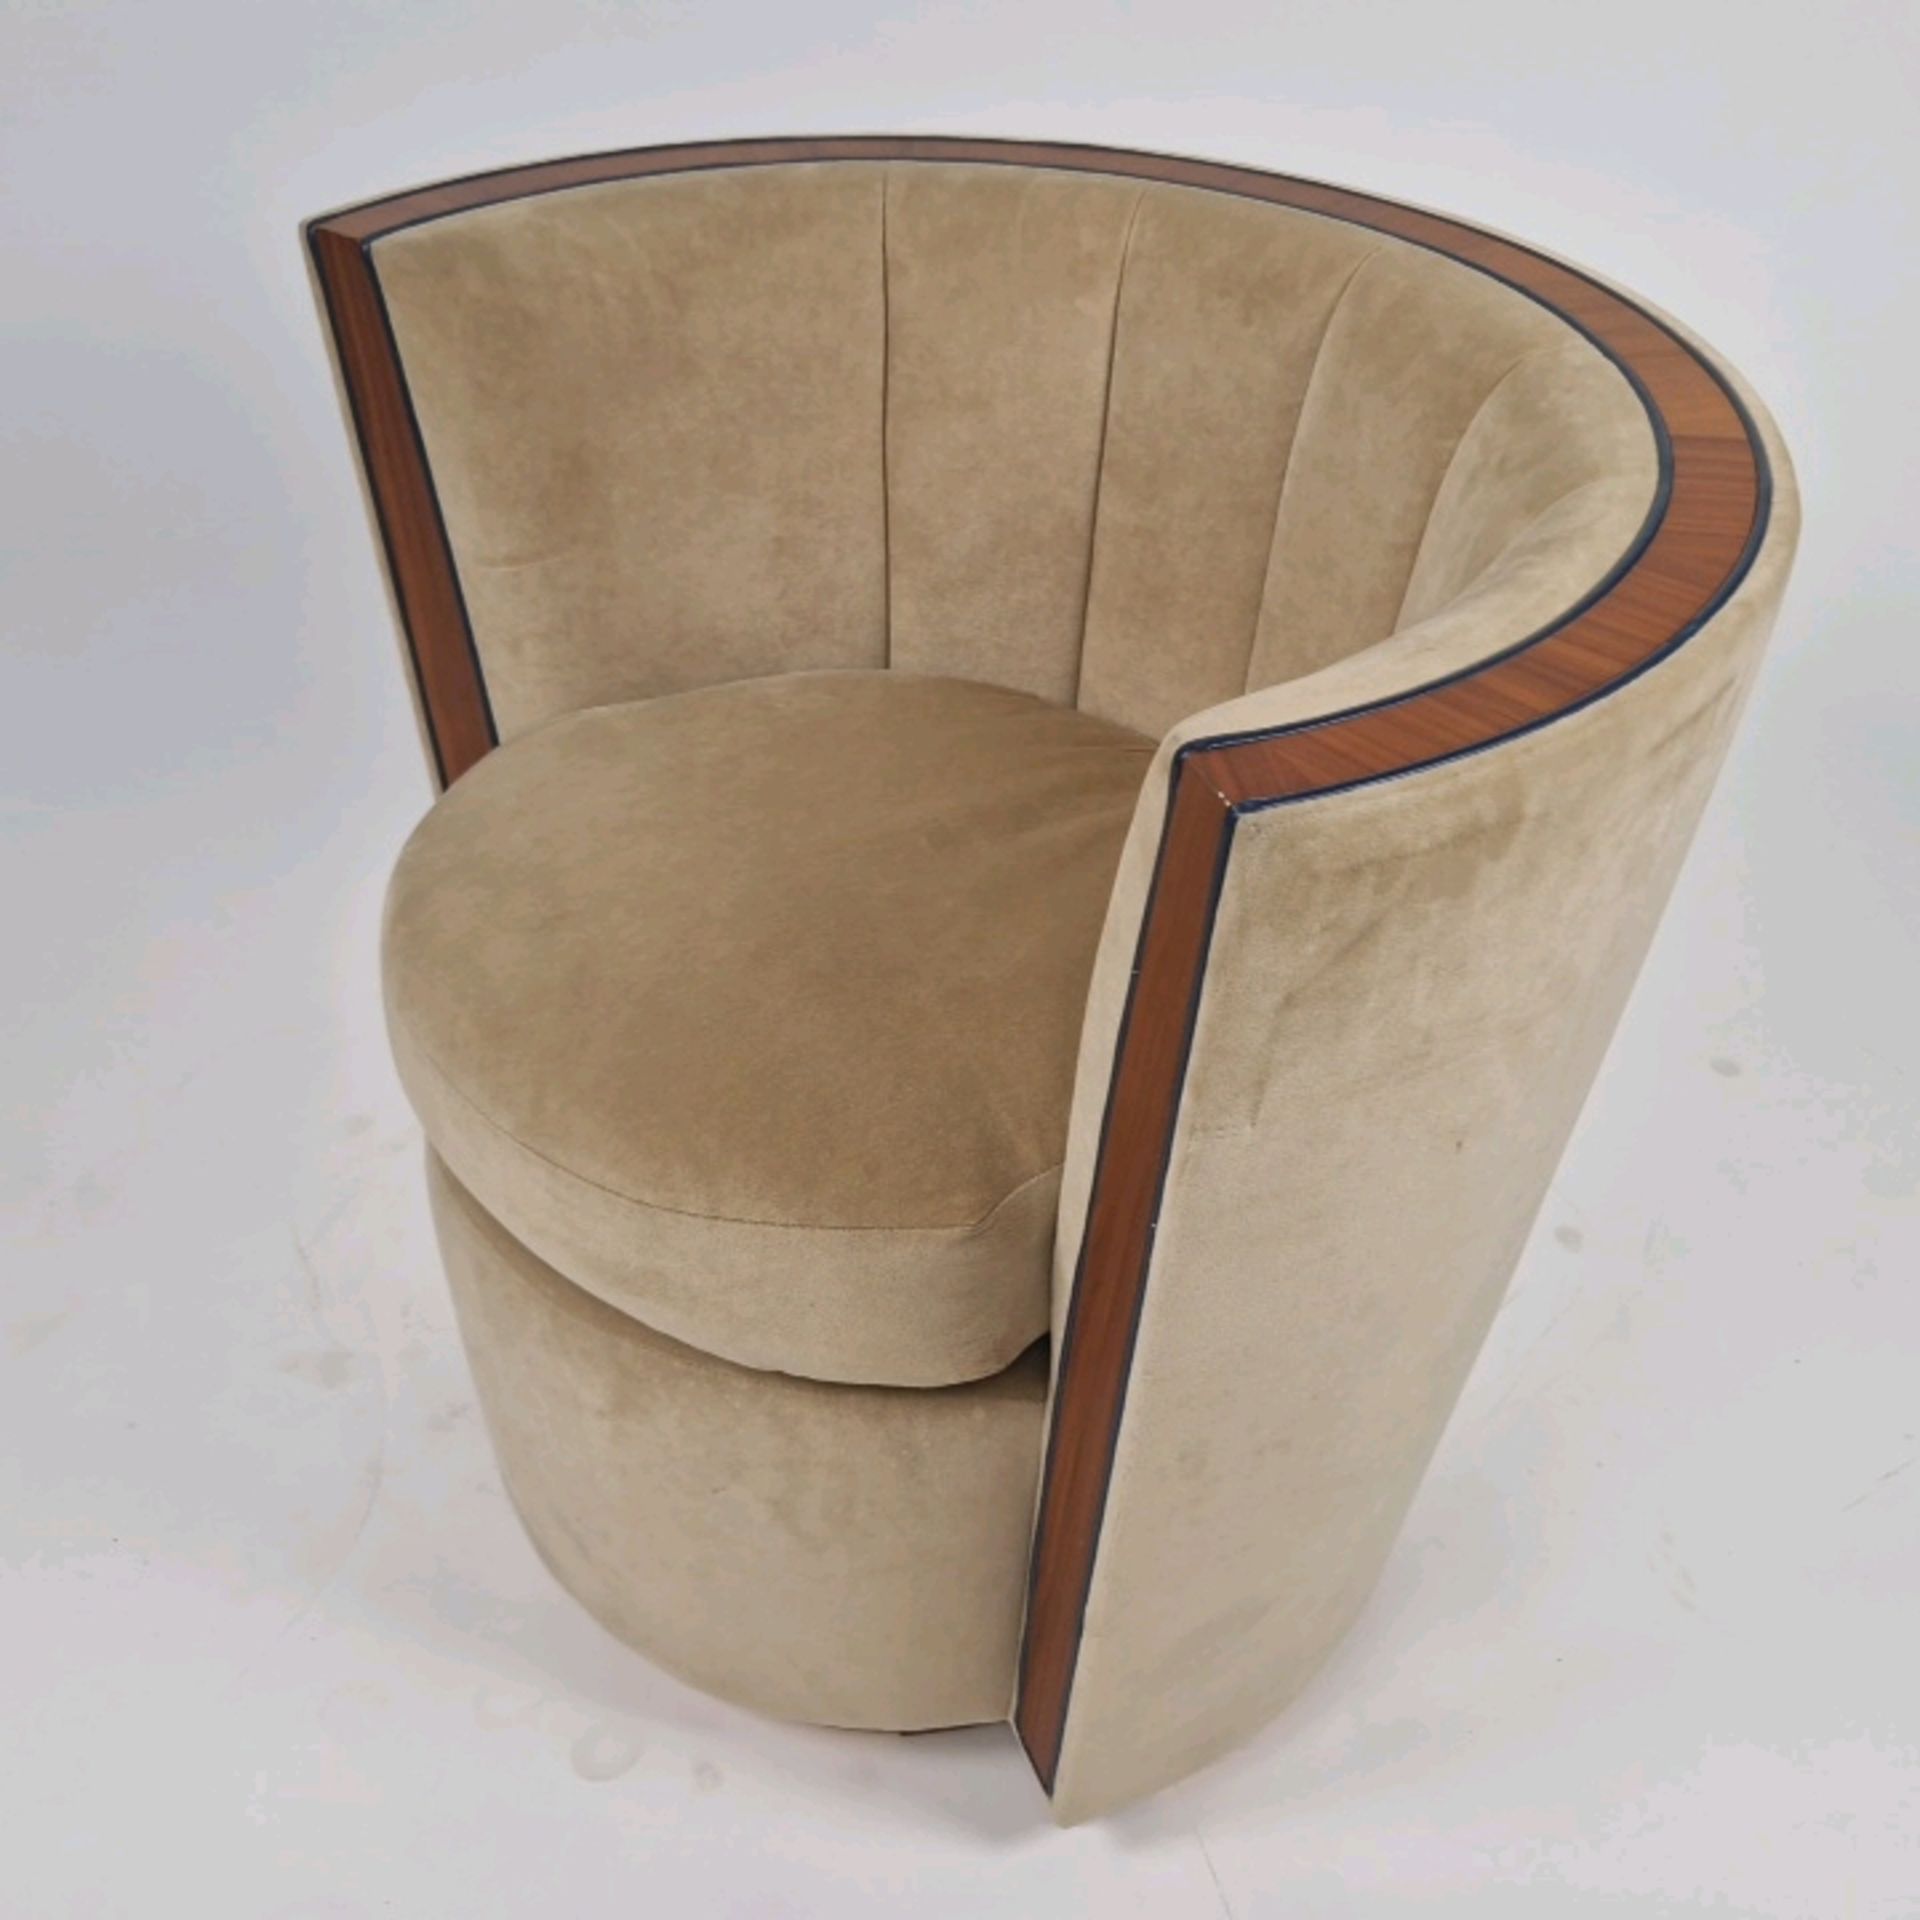 Bespoke Deco Tub Chair Made for Claridge's by David Linley - Image 4 of 7